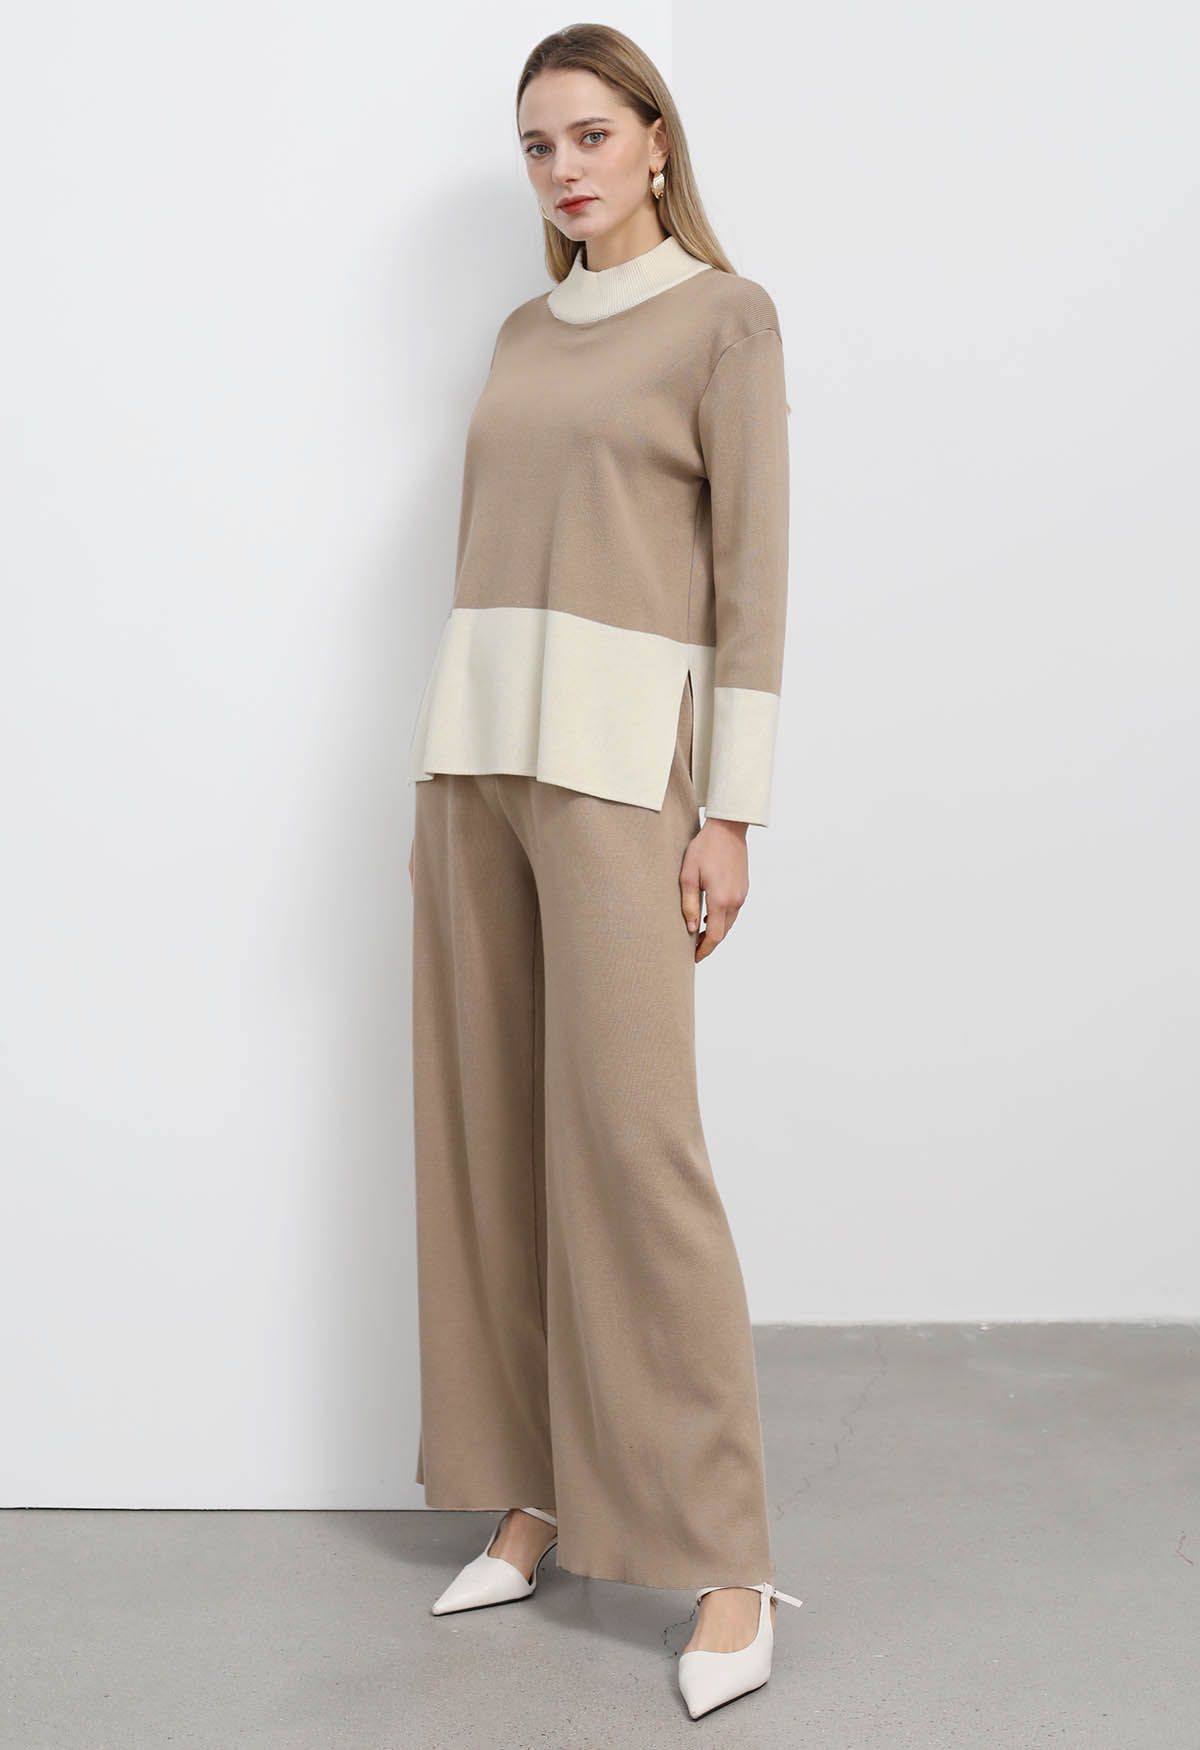 Color Block Mock Neck Knit Sweater and Pants Set in Light Tan